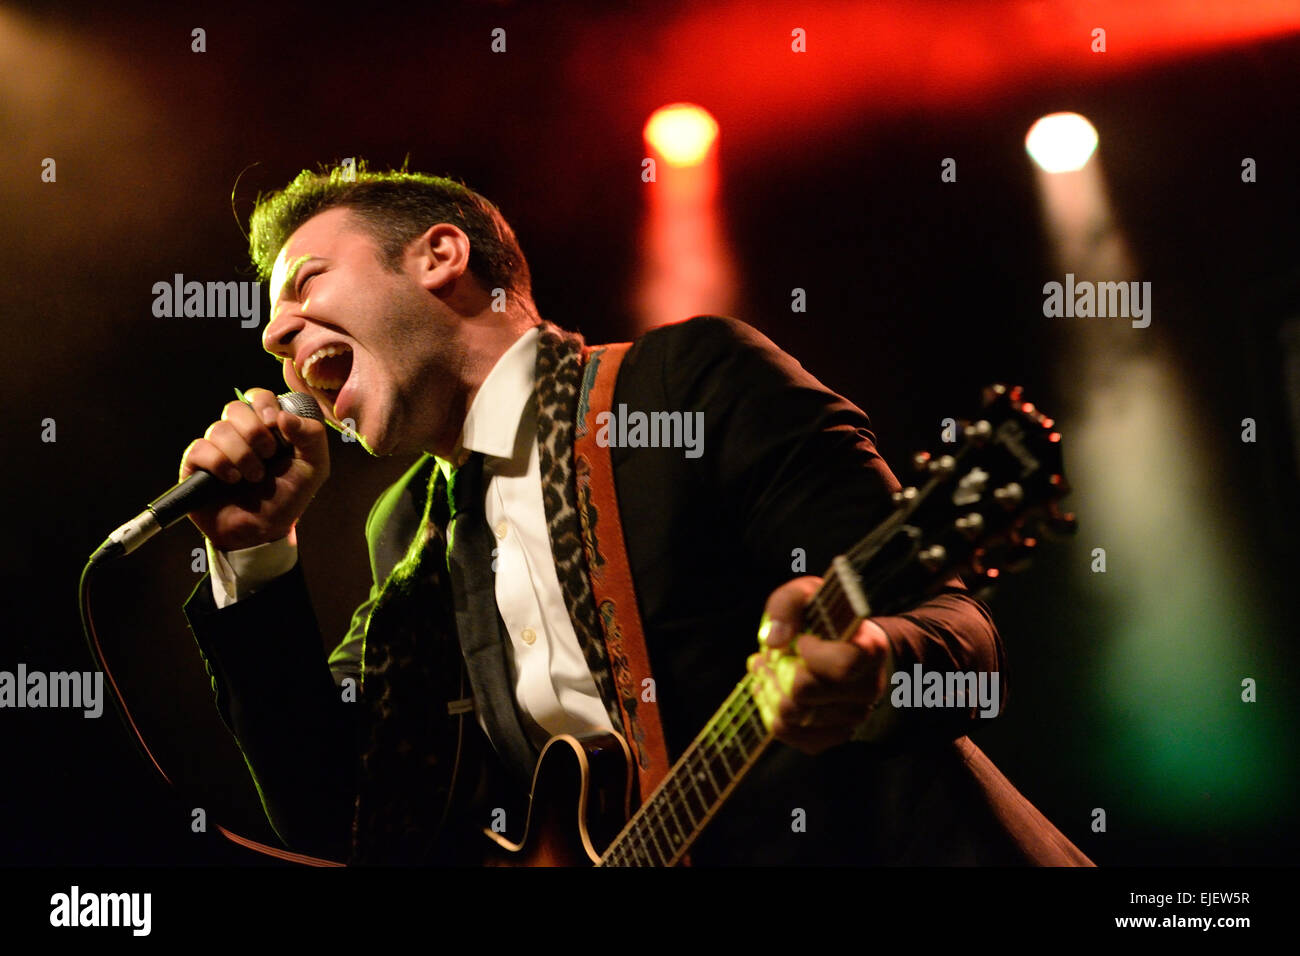 BARCELONA - MAY 15: Eli Paperboy Reed, American singer and songwriter, performs at Barts stage. Stock Photo